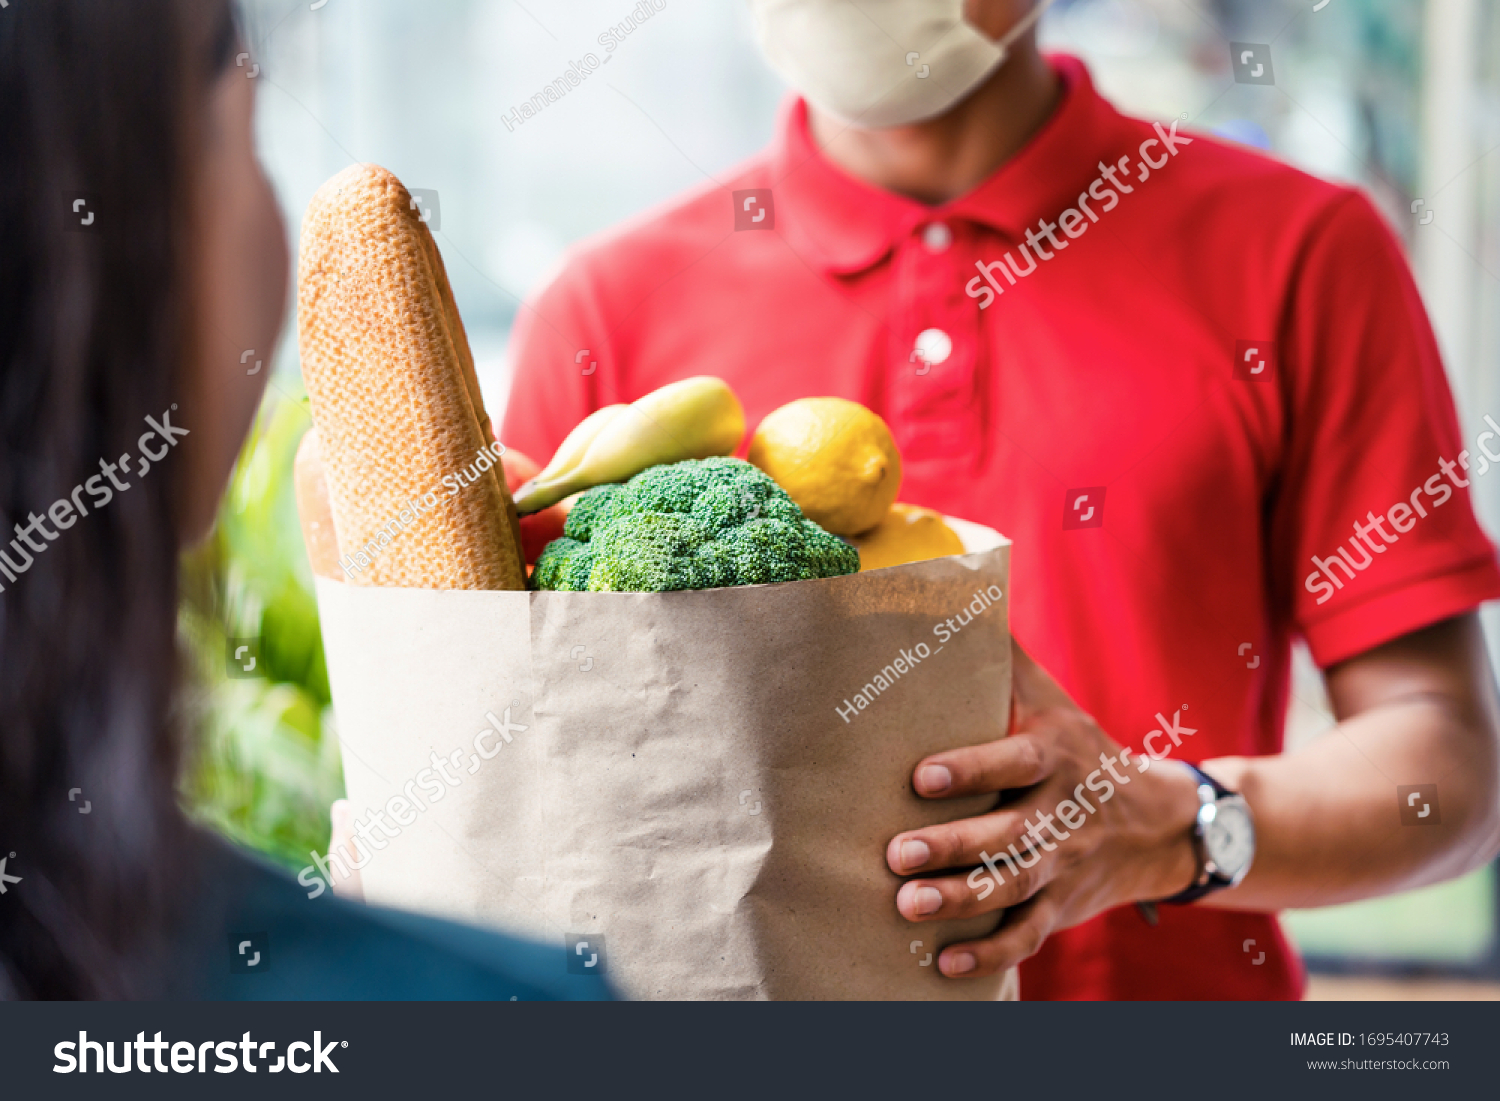 Asian deliver man wearing face mask in red uniform handling bag of food, fruit, vegetable give to female costumer in front of the house. Postman and express grocery delivery service during covid19. #1695407743